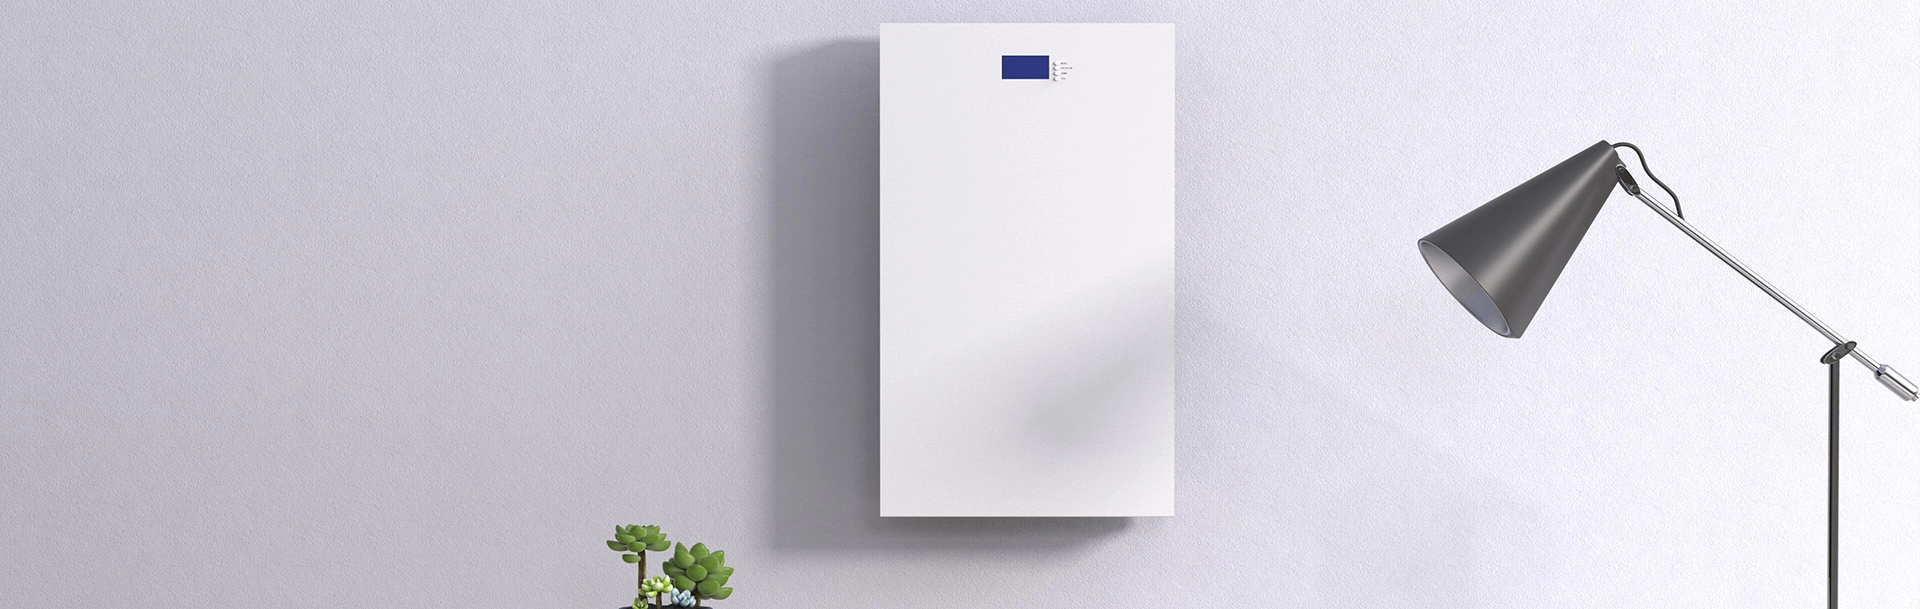 Wall-mounted Lithium Battery for Home Energy Storage